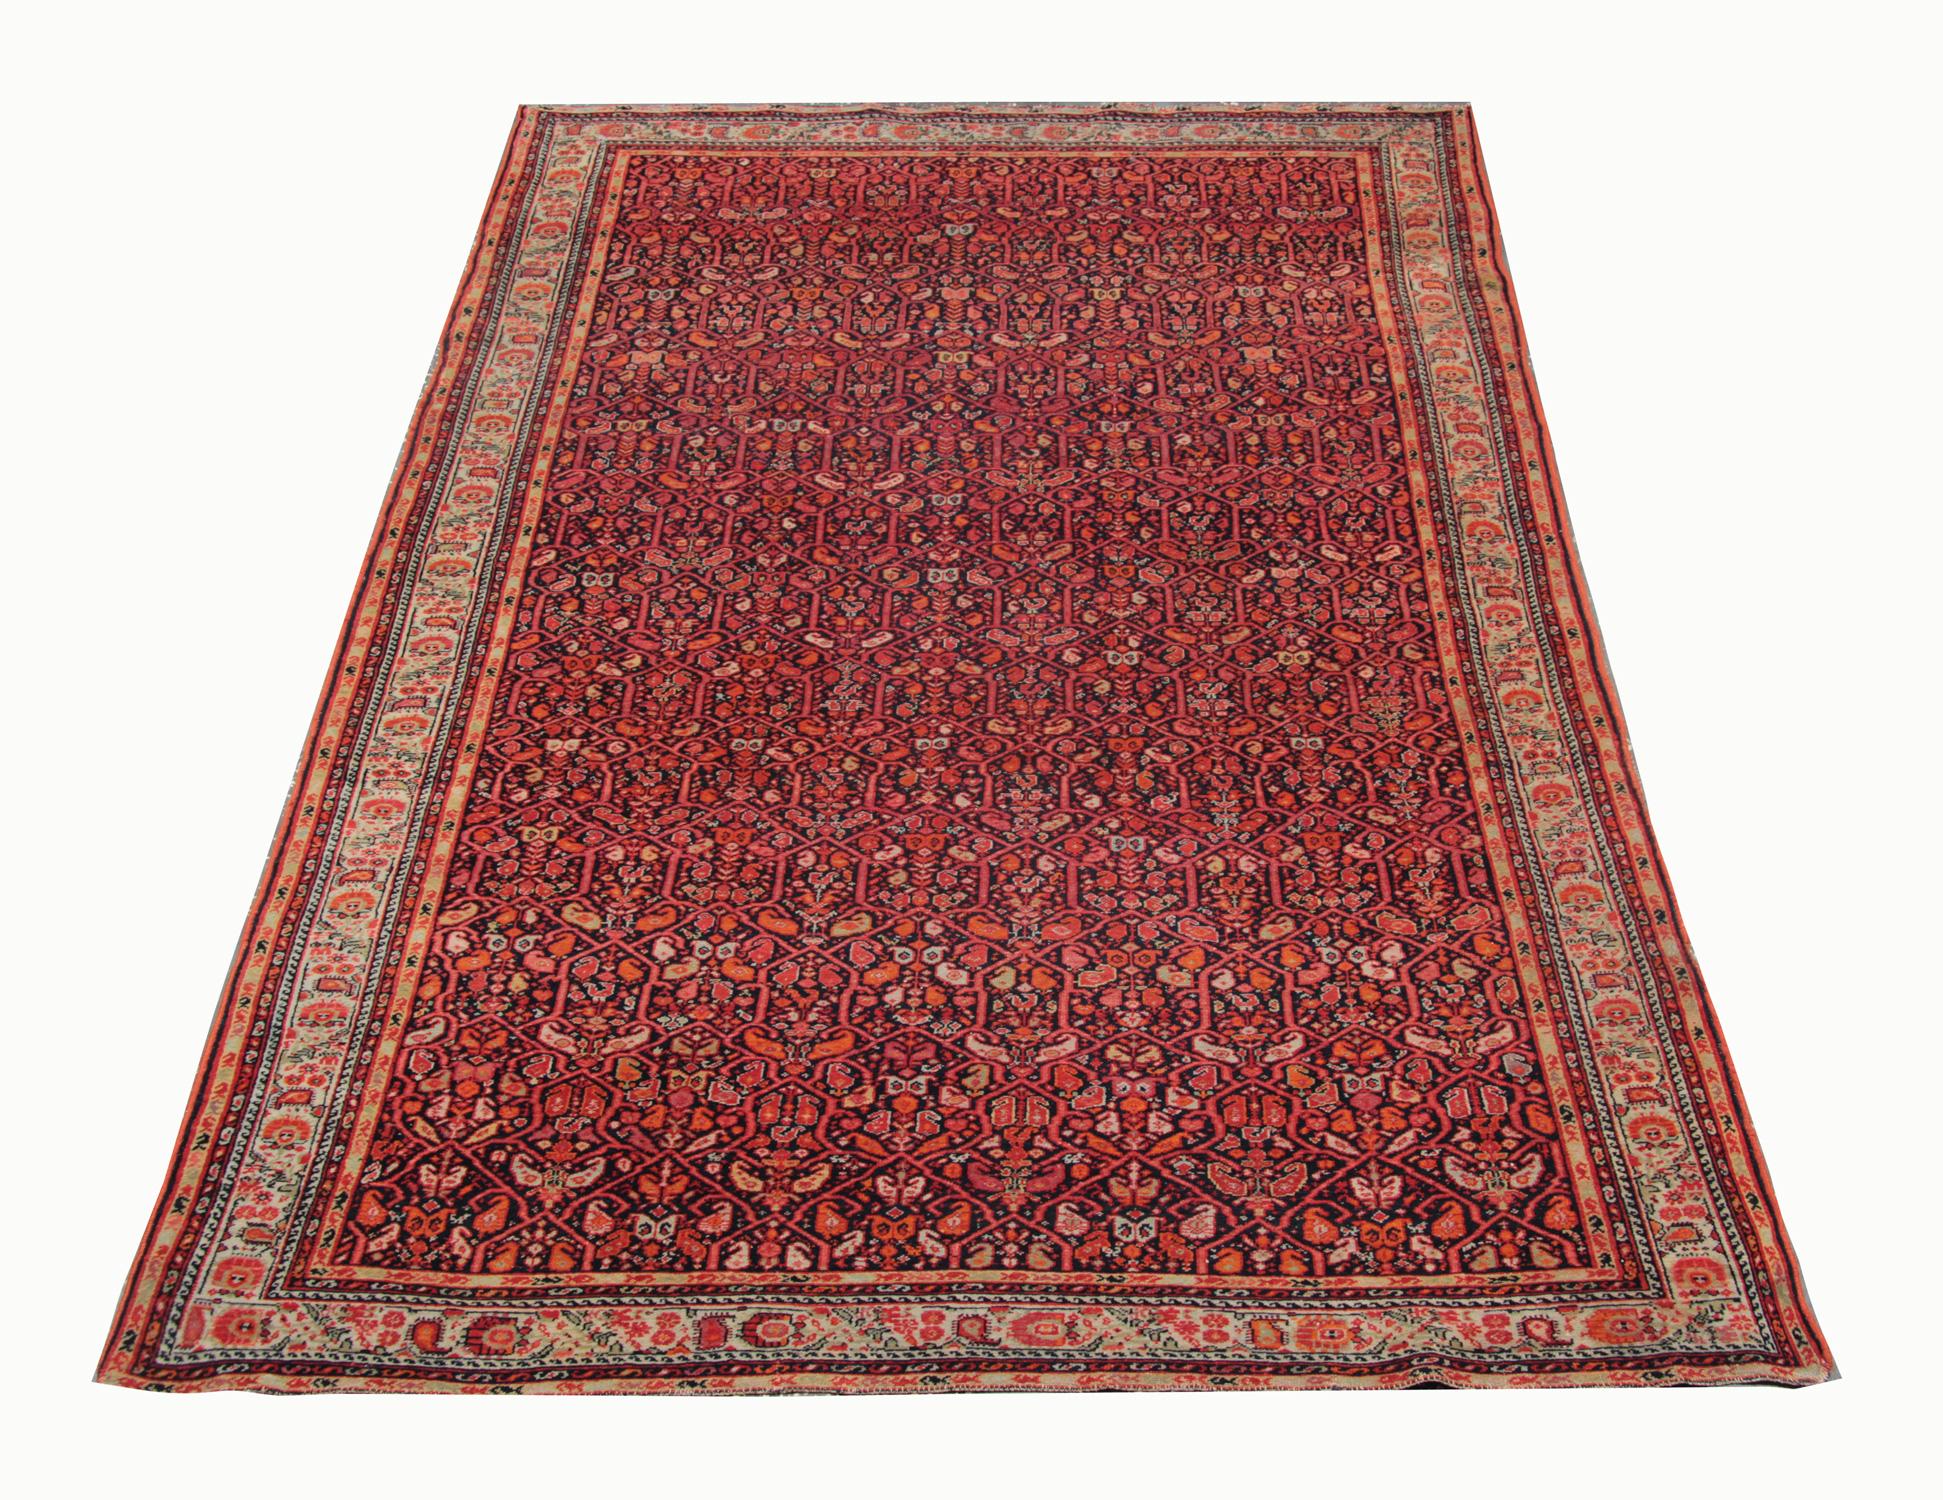 Yellow and red have been woven into a highly-detailed design in this antique rug Caucasian area rug, handwoven in Azerbaijan in 1880. The Malayer rug features a stunning all-over design woven on a red background with floral patterns in a geometric